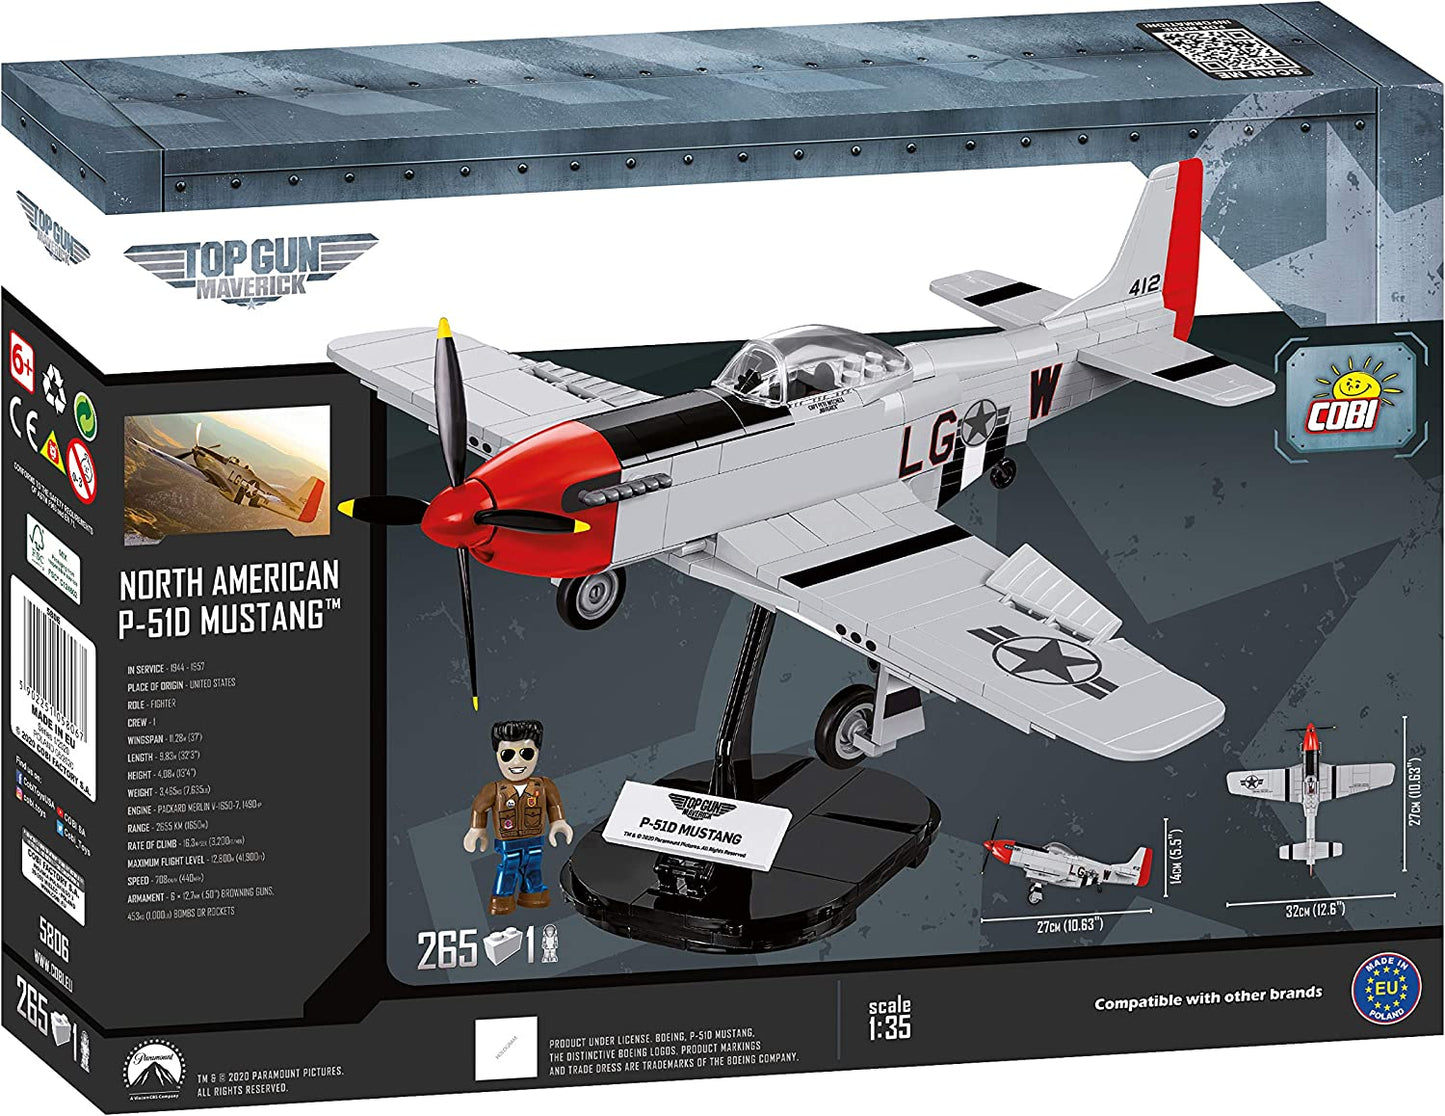 The back of the box for a Top Gun Mustang P-51D construction set.